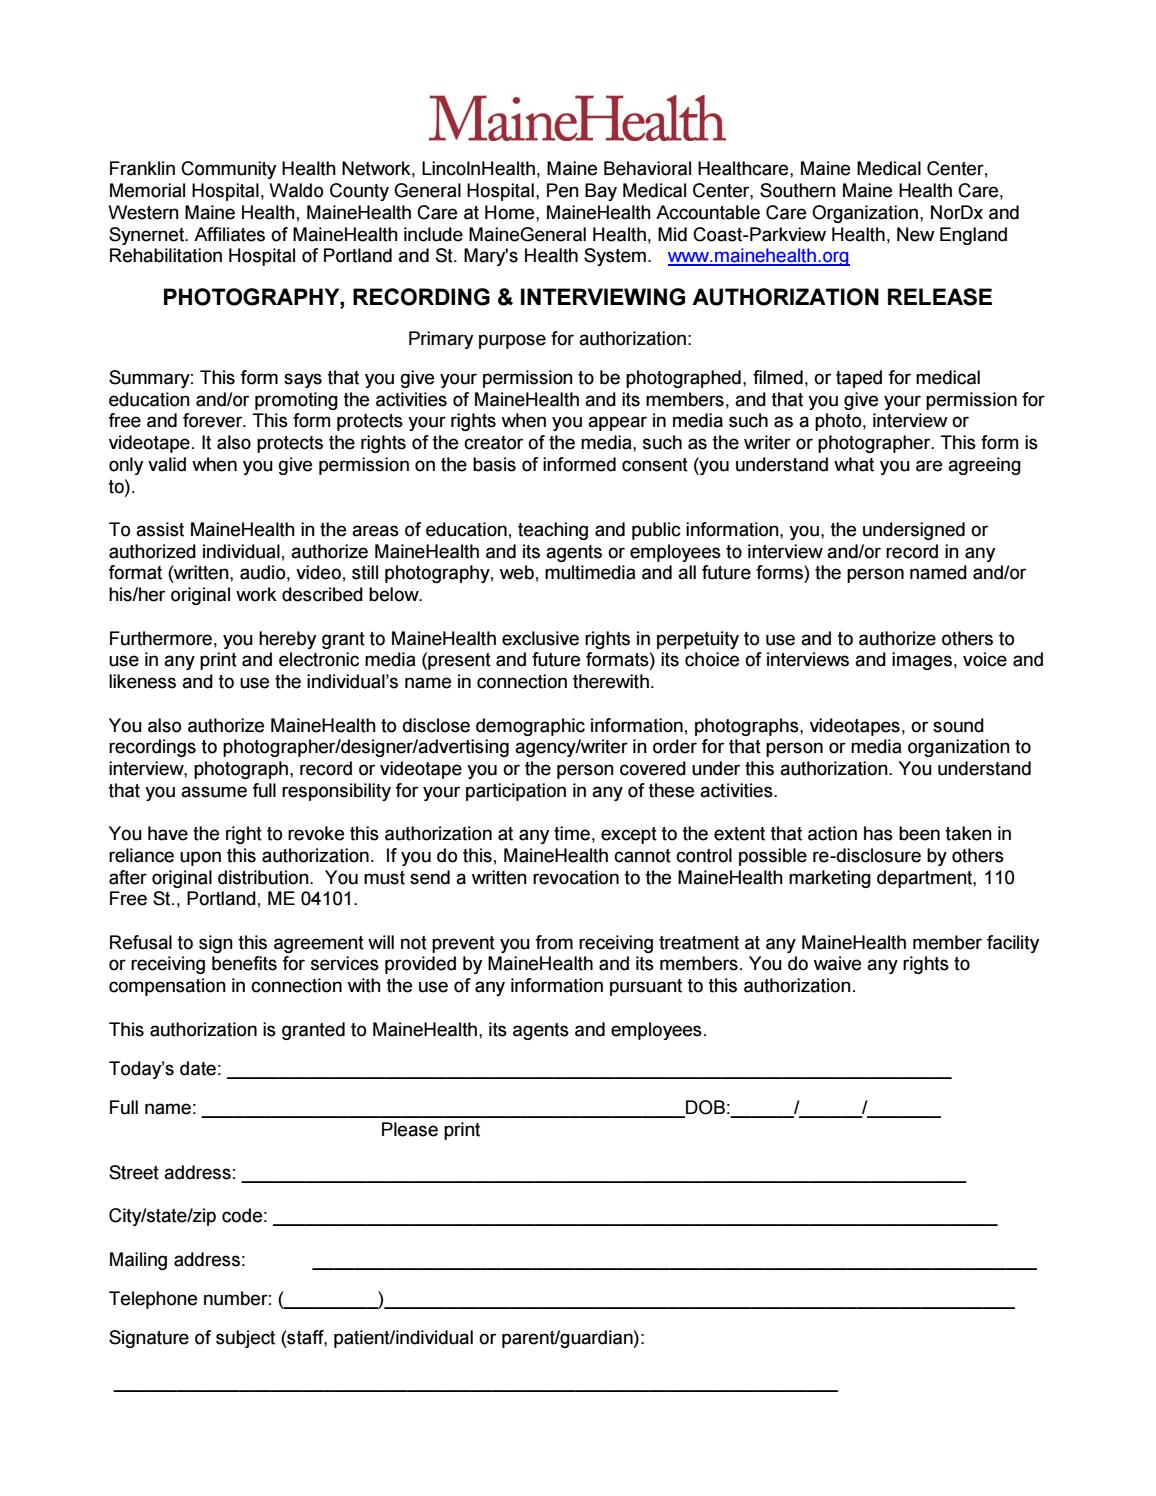 MaineHealth Photo Release Form By Pen Bay Medical Center Issuu